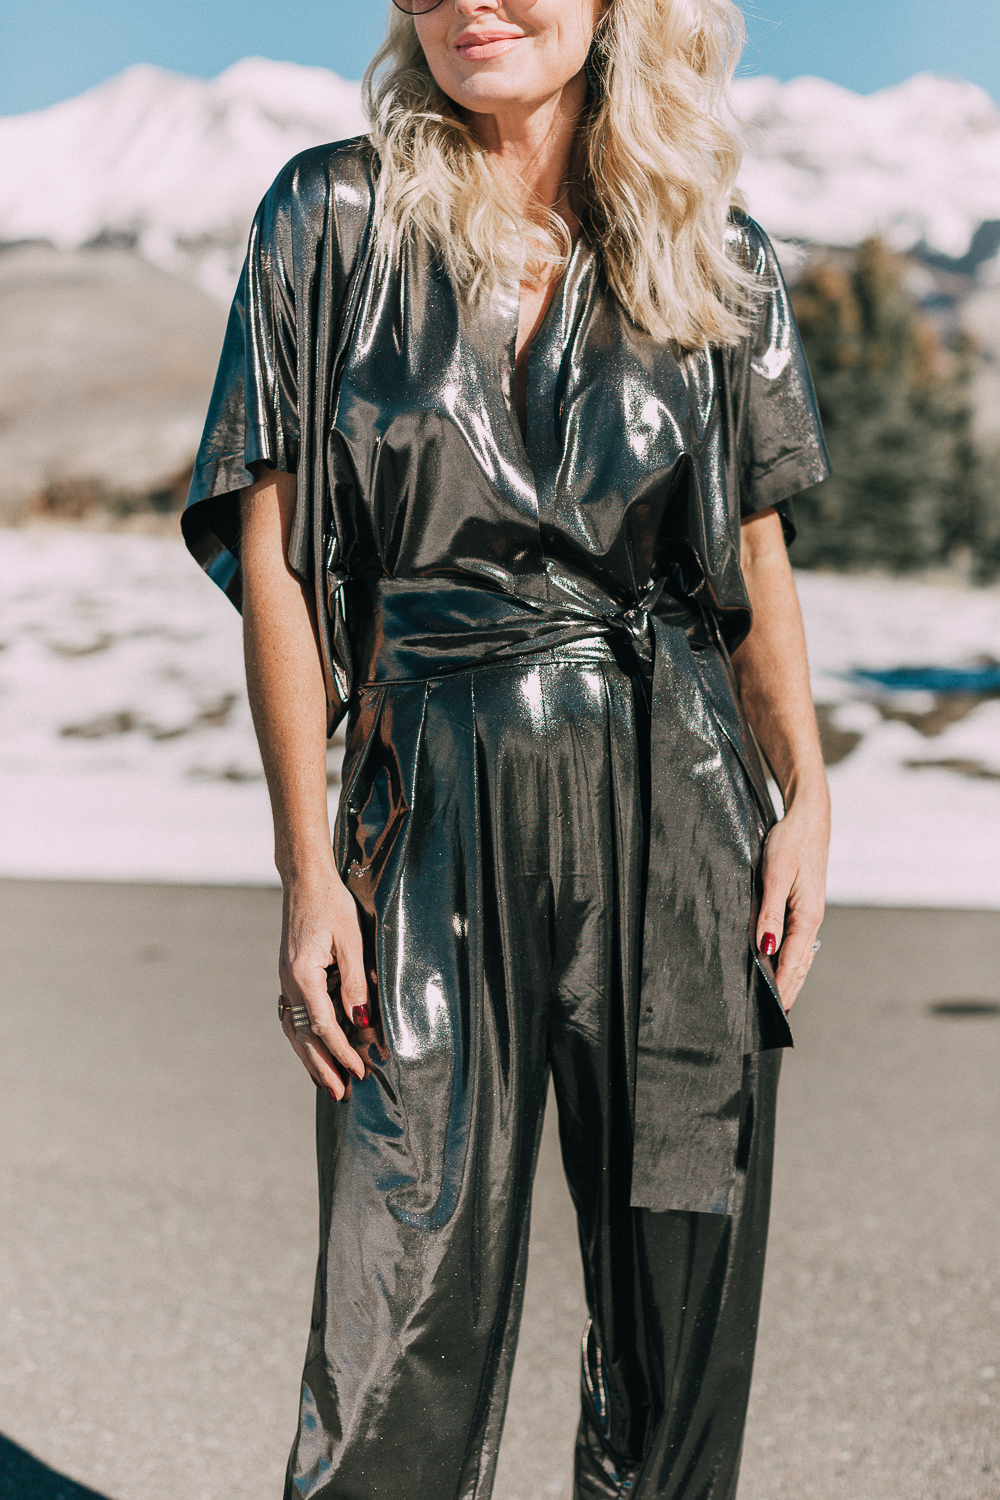 Metallic lamé jumpsuit by Norma Kamali paired with black heels worn by fashion blogger over 40 Erin Busbee of BusbeeStyle.com in Telluride Colorado